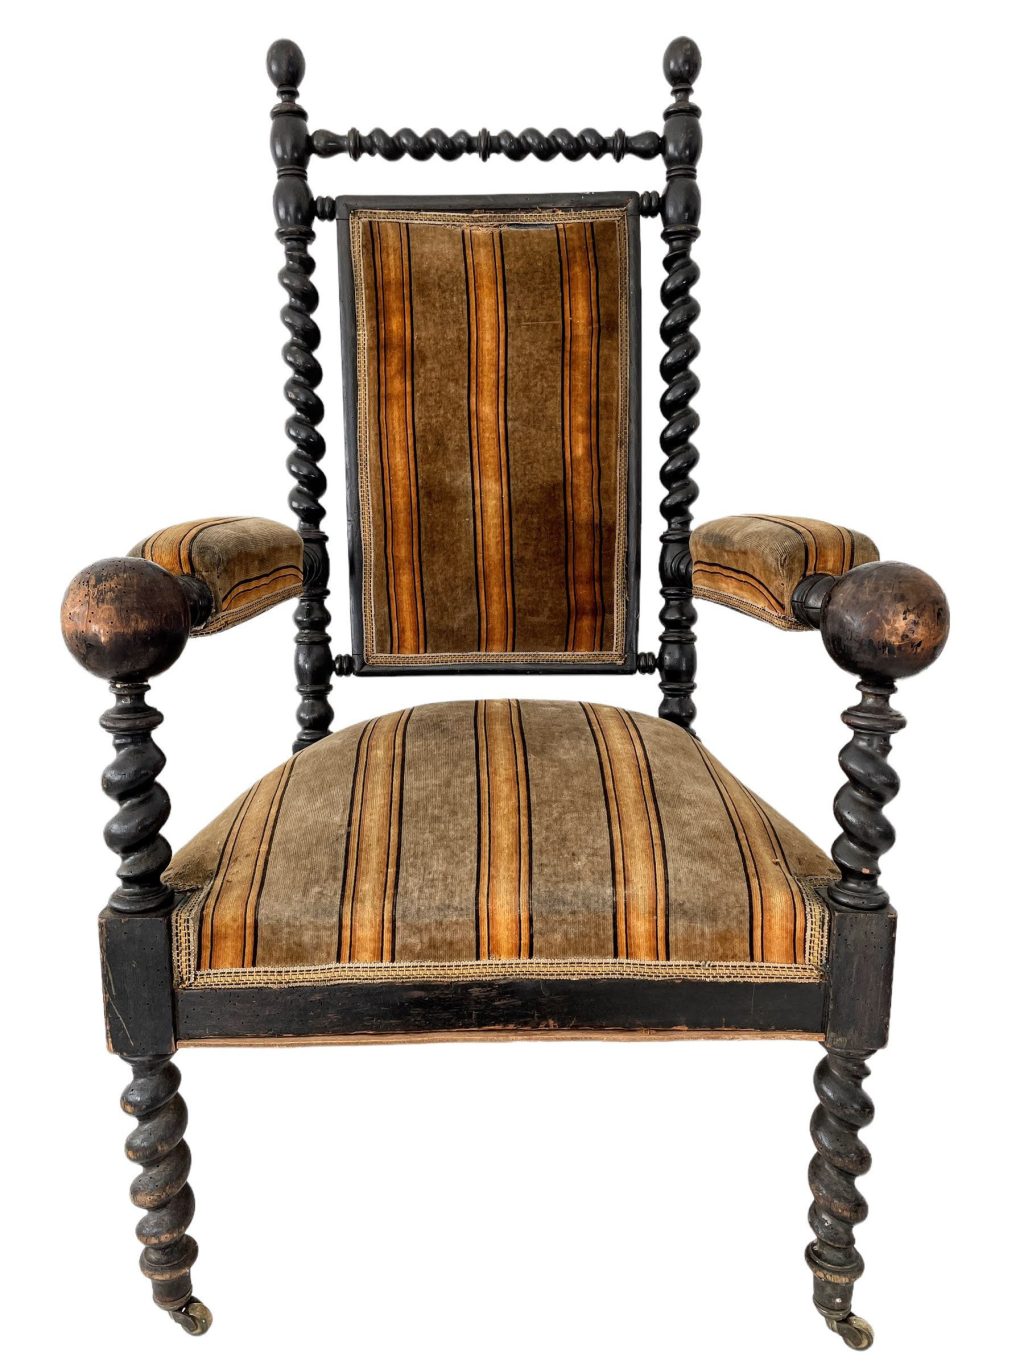 Antique French Chair Barley Twist Worn Upholstery Padded Cushioned Natural Wood Seating Prop Throne c1850’s / EVE